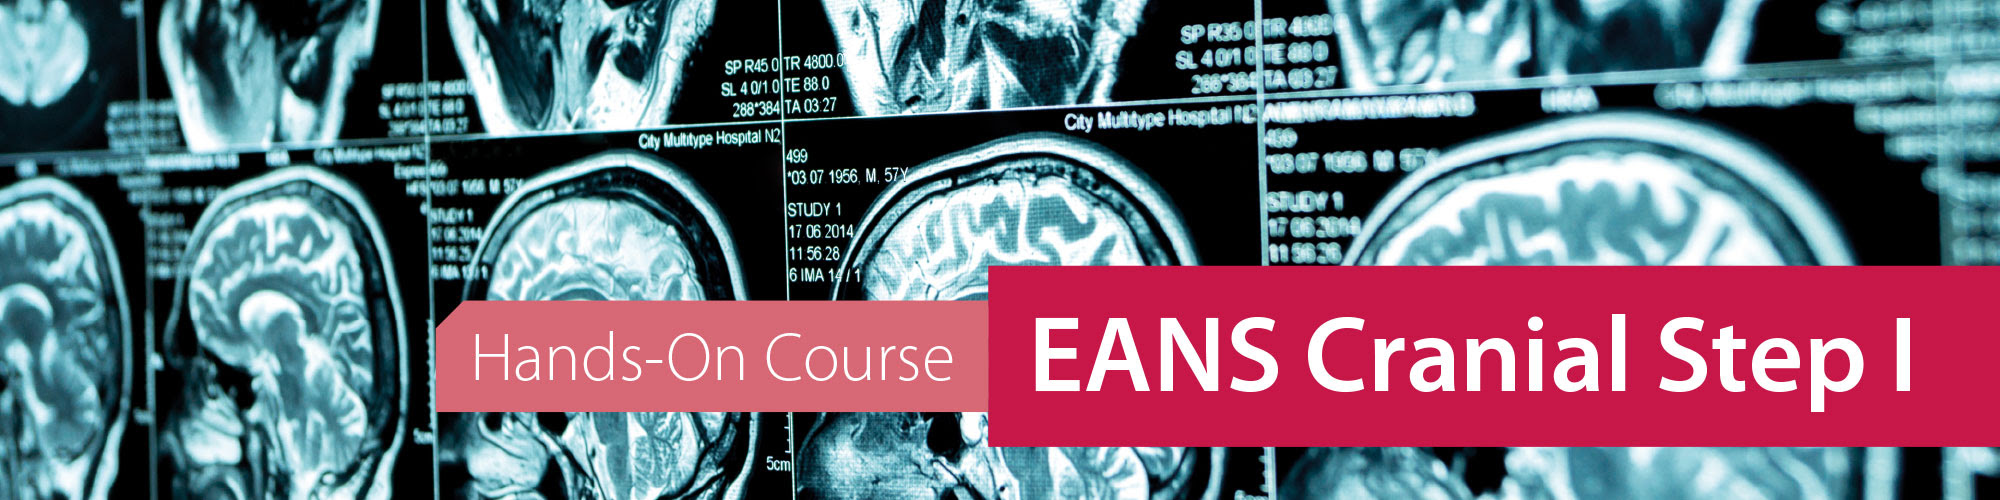 EANS Cranial Step I Hands-On Course